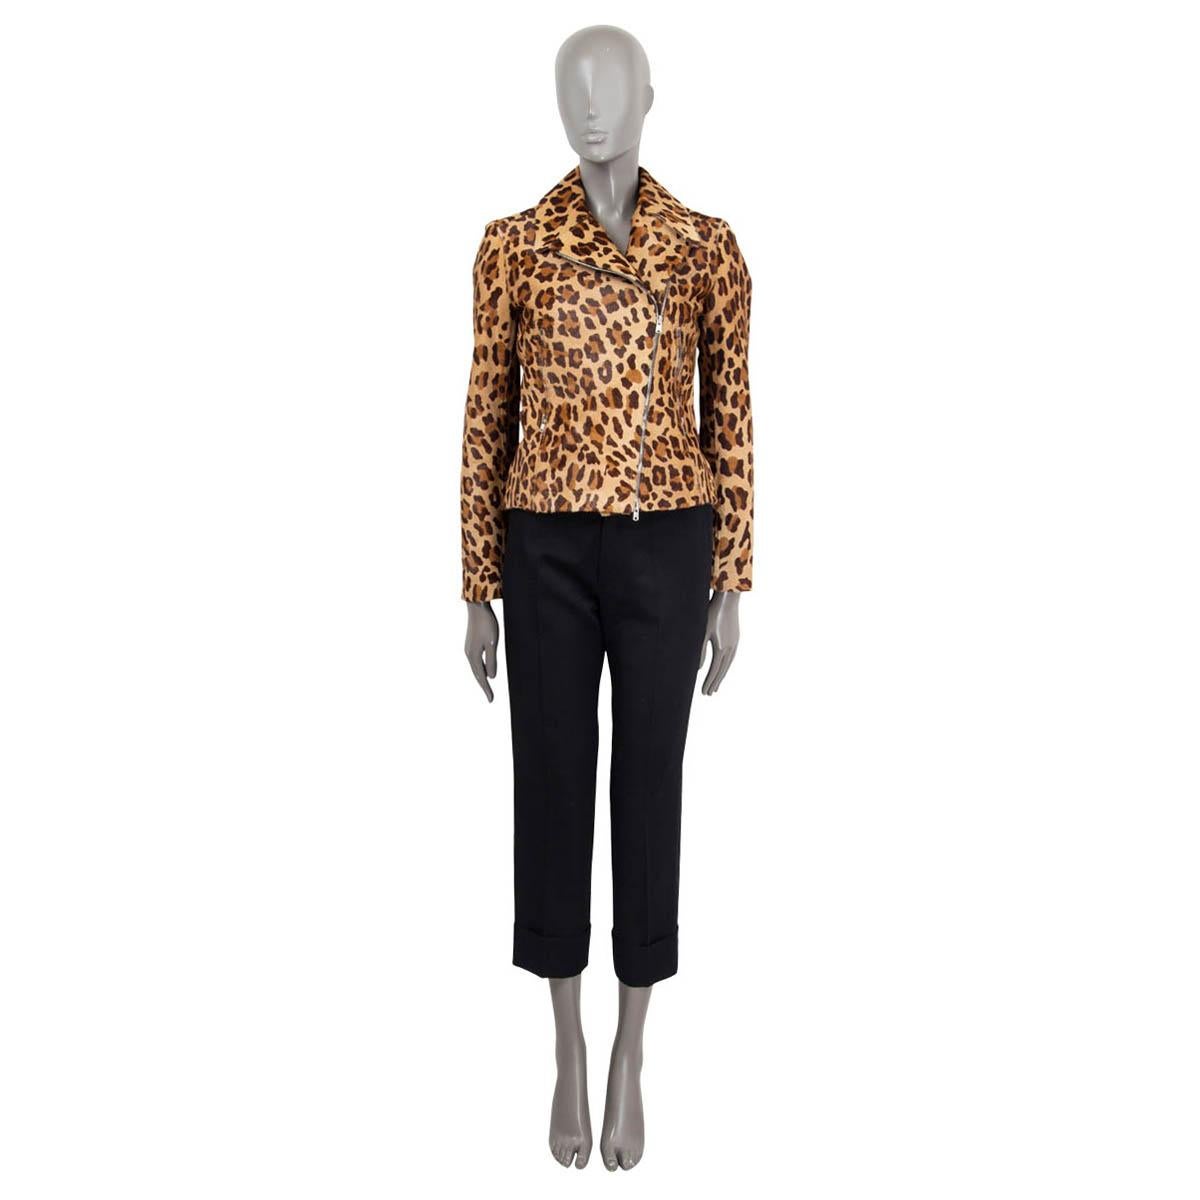 100% authentic Alaia leopard print biker jacket in camel and brown leather (100%). Features two zip pockets on the front and zipped cuffs. Opens with a diagonal zipper on the front. Lined in black acetate (100%). Has been worn and is in excellent